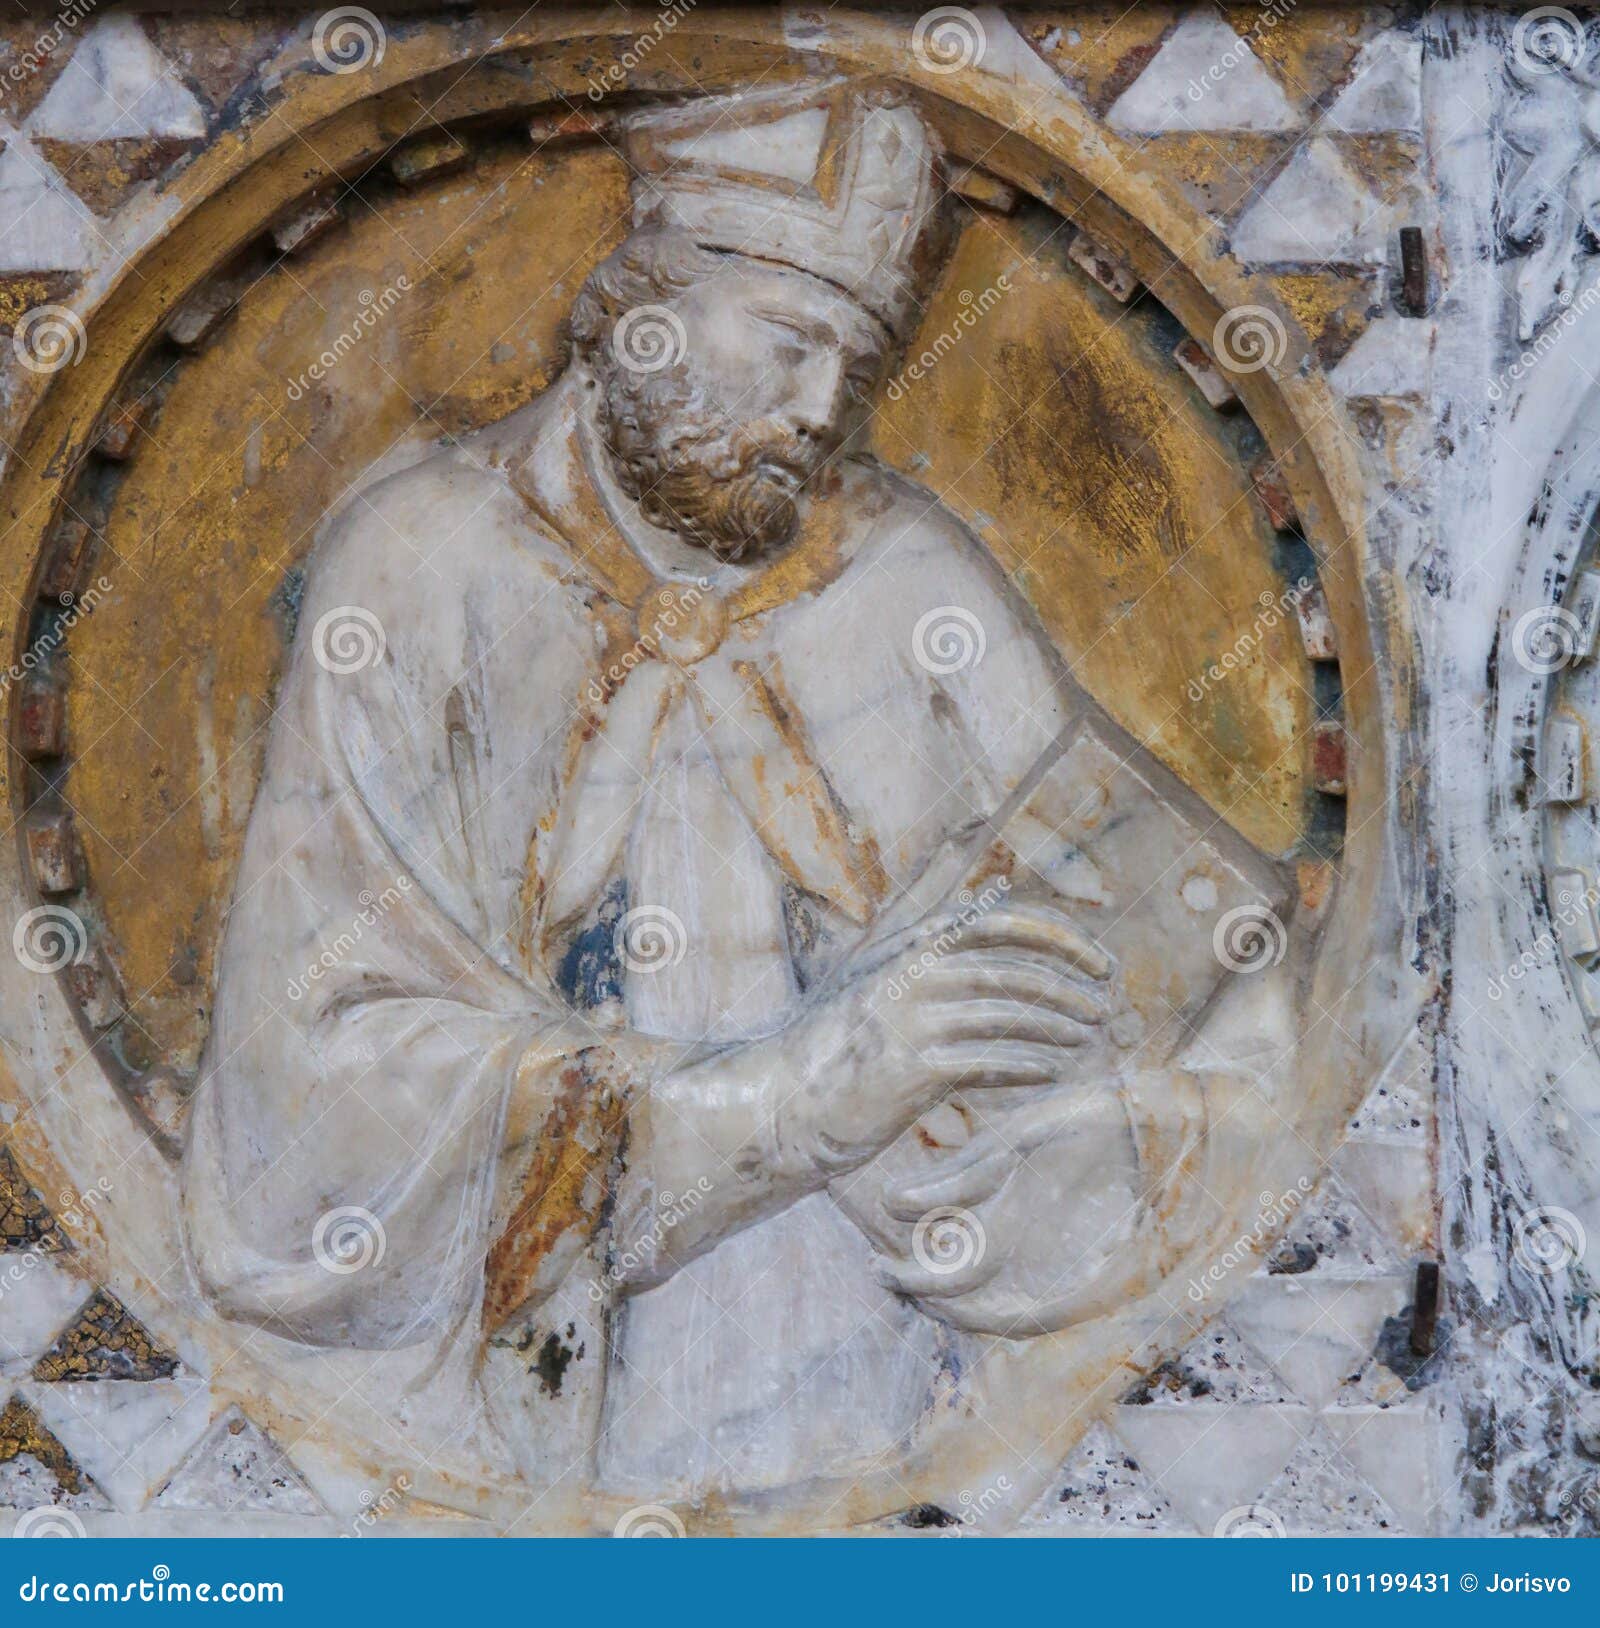 bishop sculpture in the church of sant agostino in san gimignano, italy